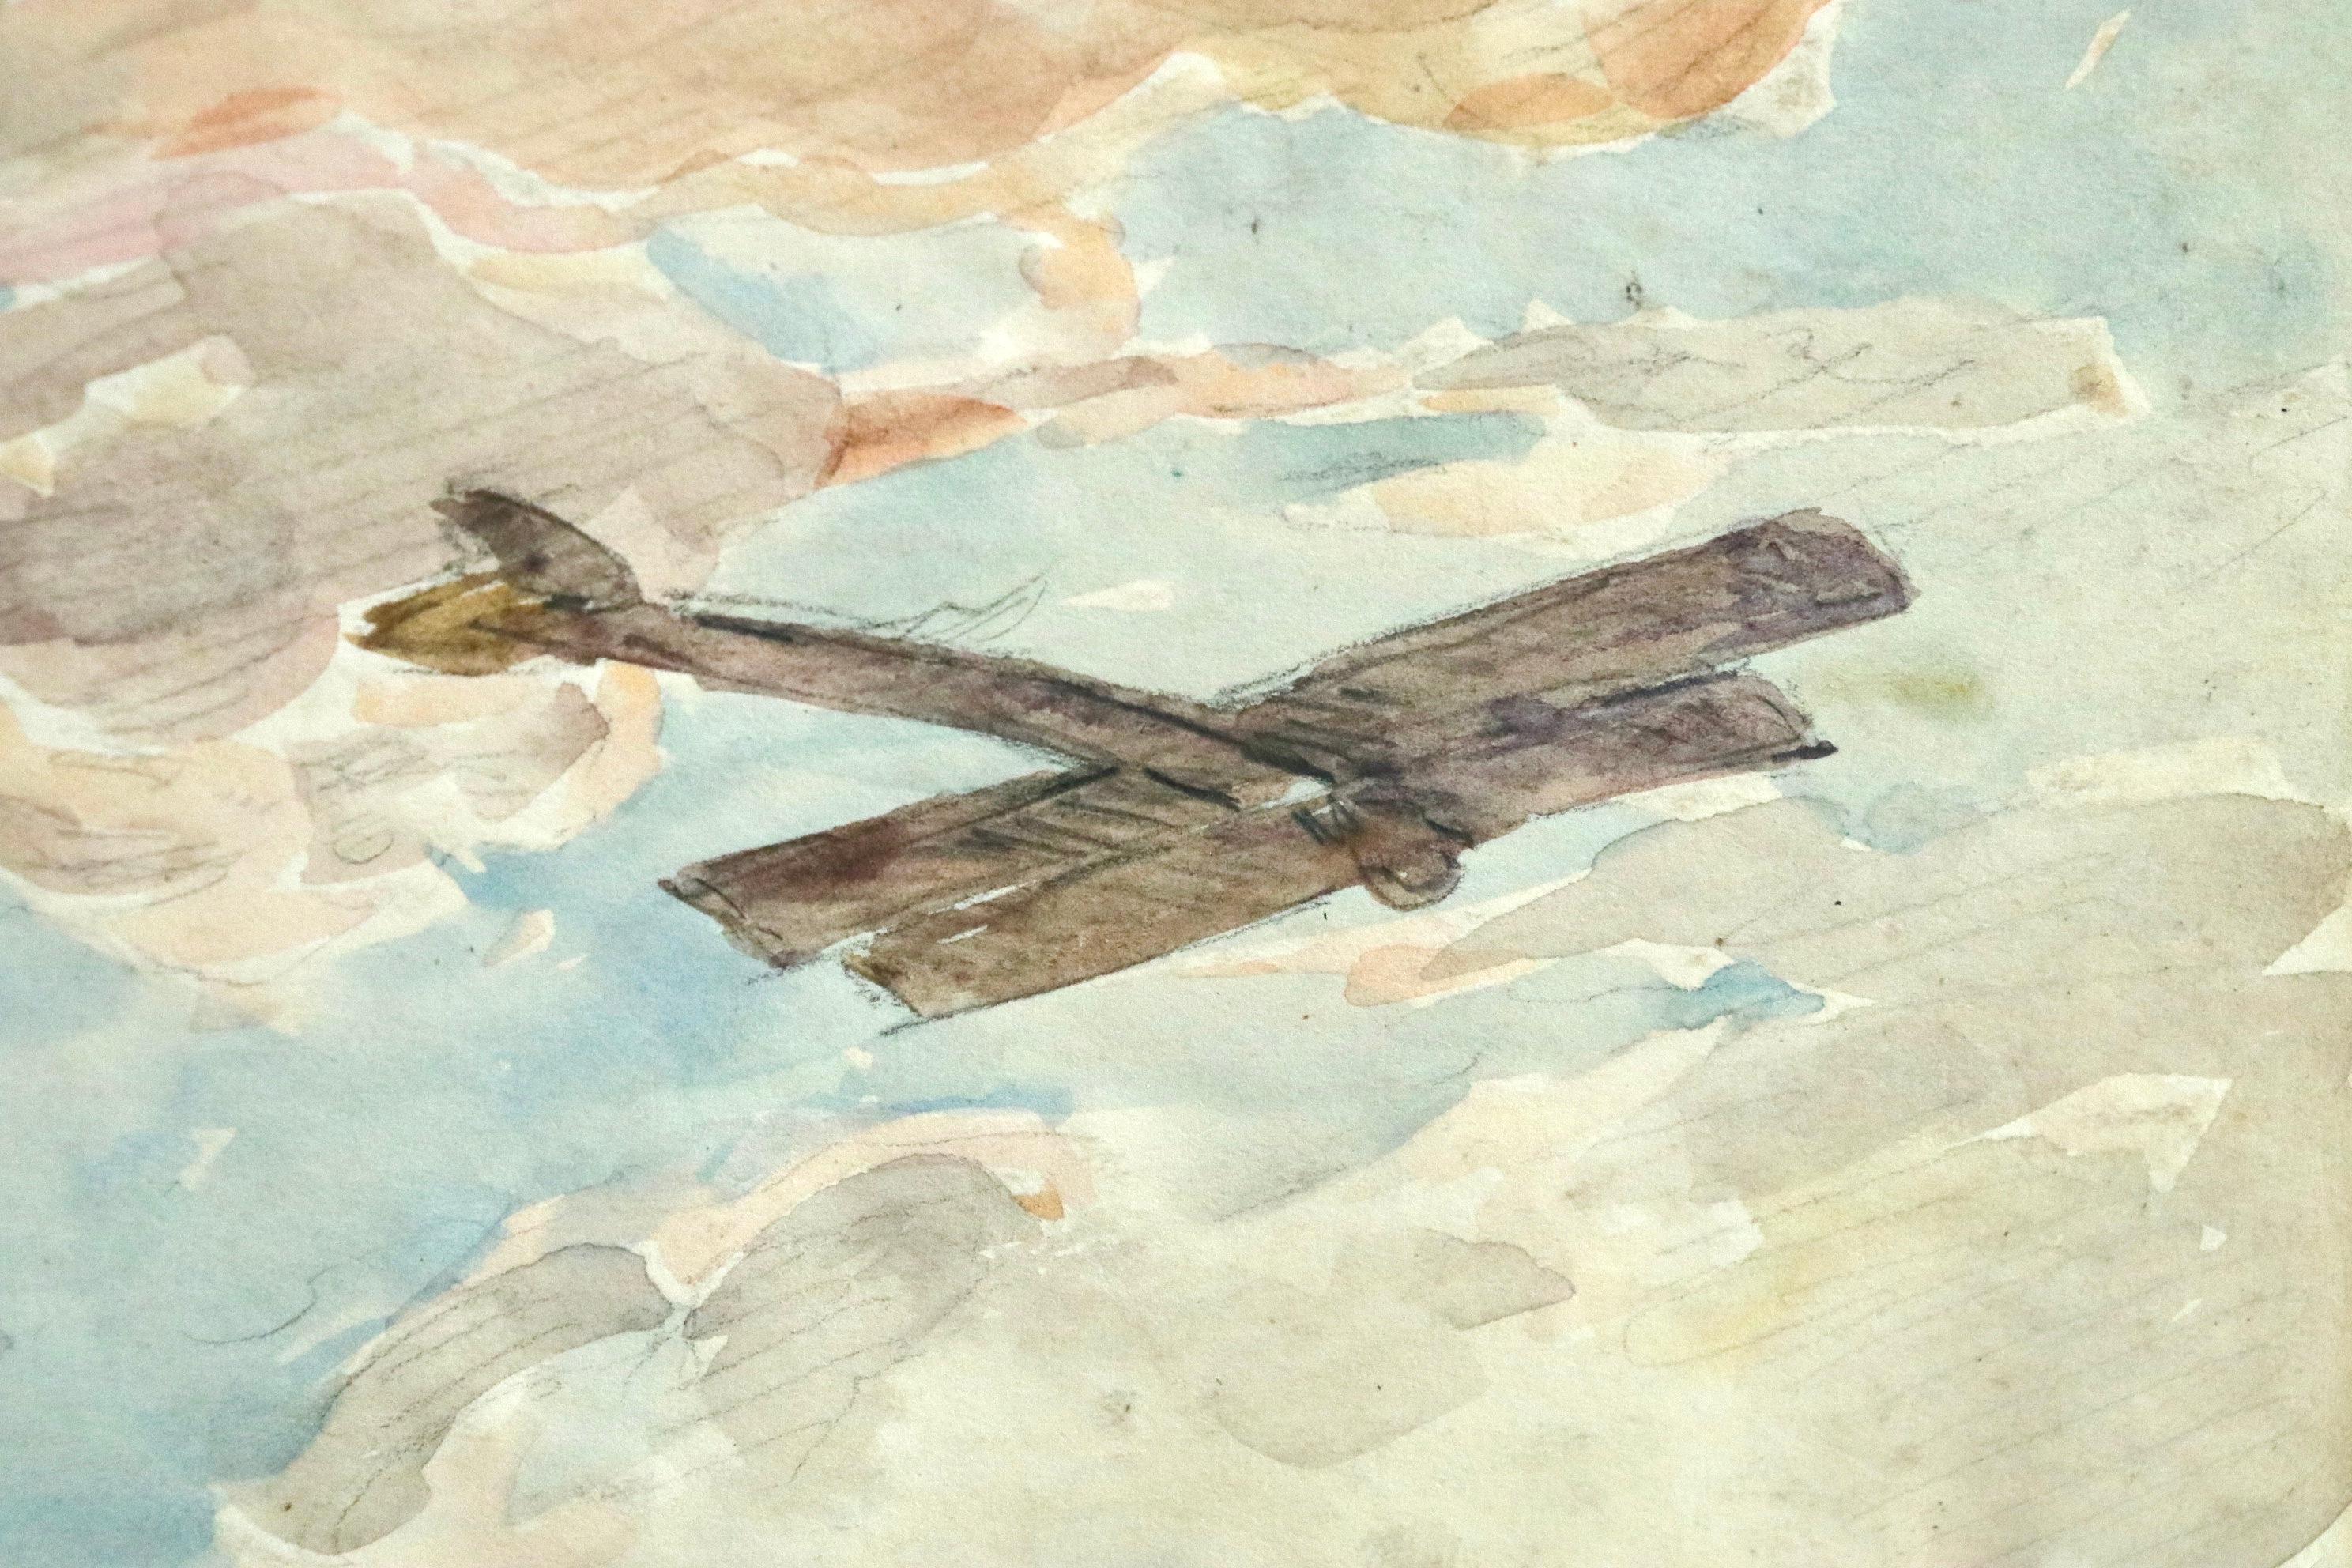 Dog Fight over Douai - 19th Century Watercolor, World War I Biplanes by H Duhem - Art by Henri Duhem